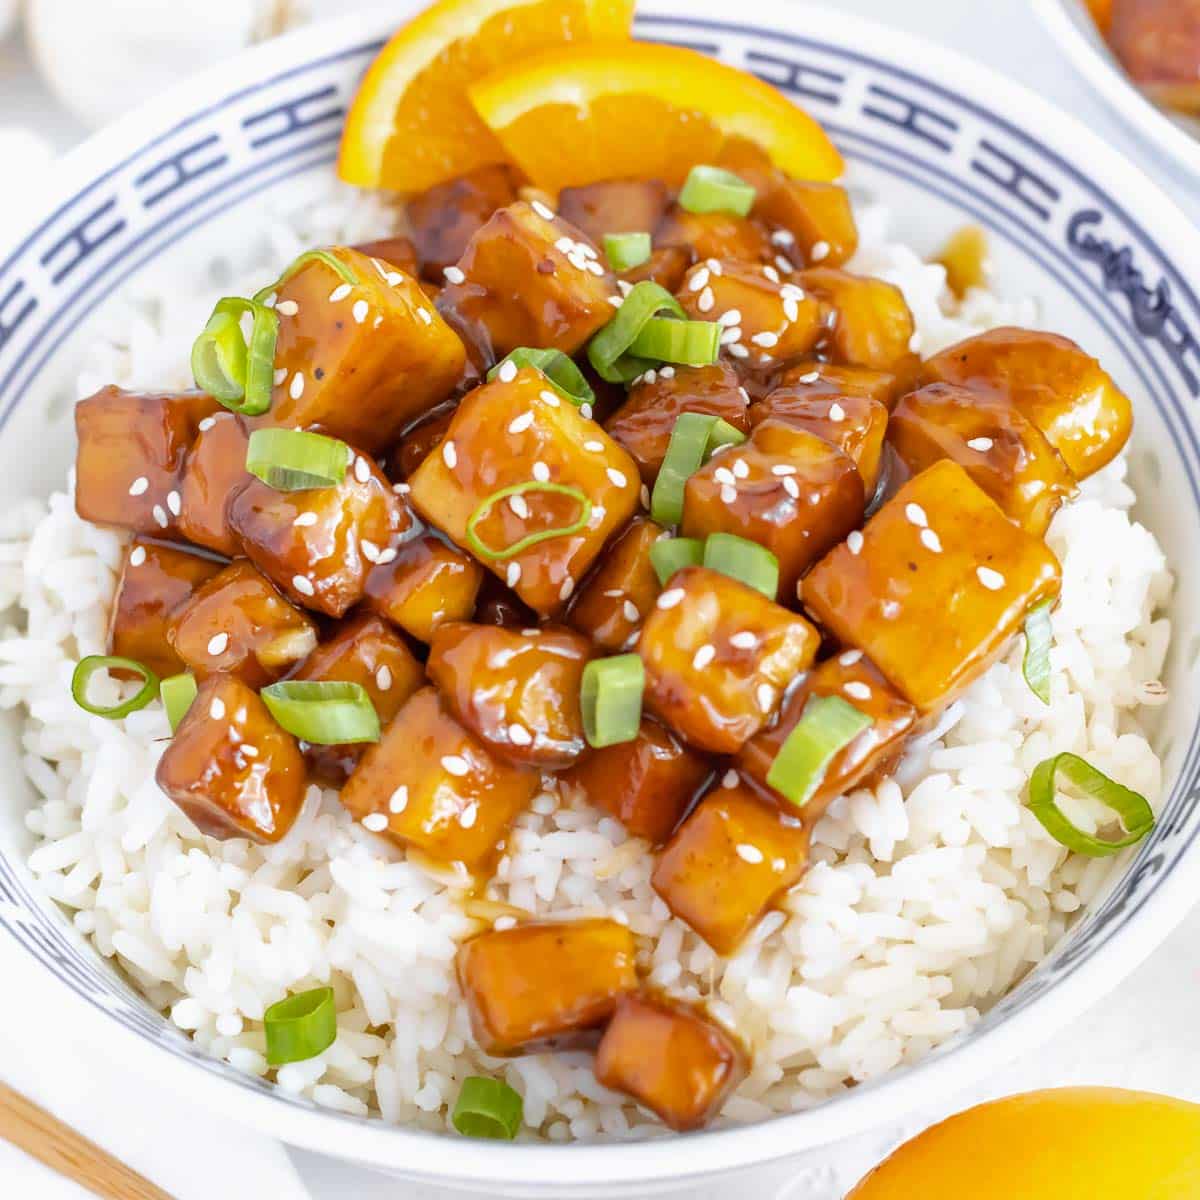 orange tofu served in a bowl on rice with spring onion.